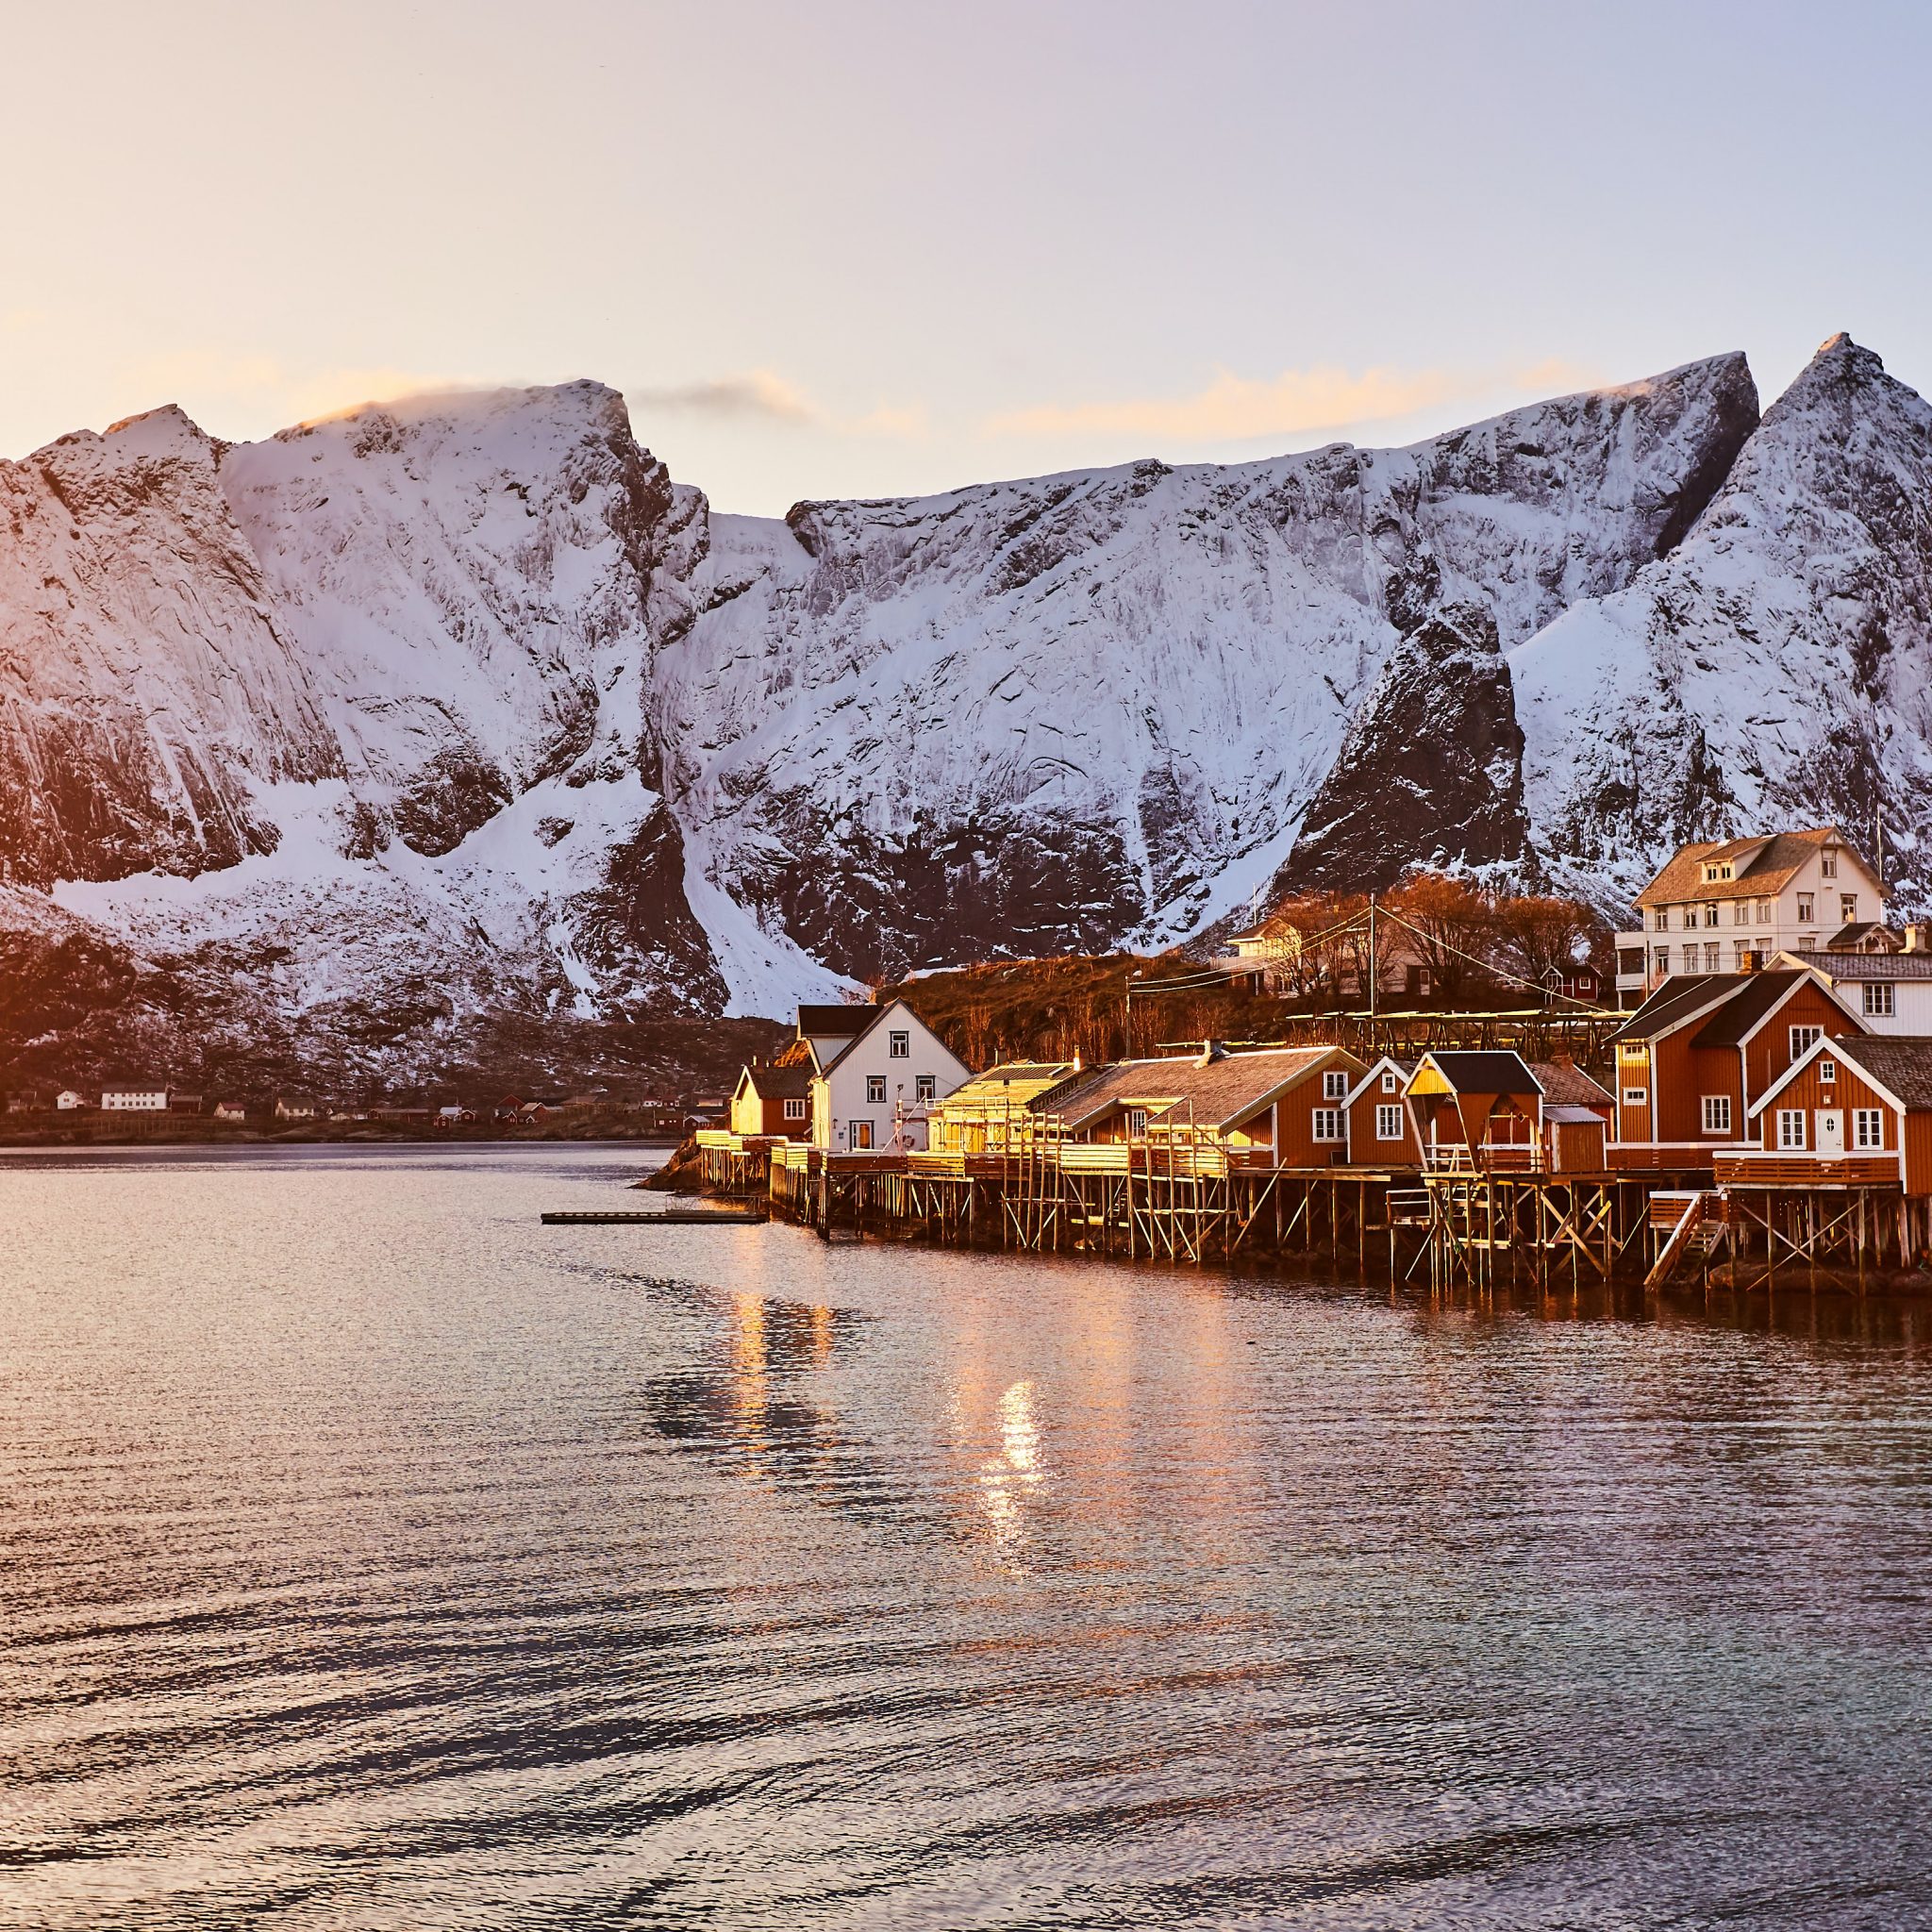 Lofoten is one of the most beautiful diving spots in the world.